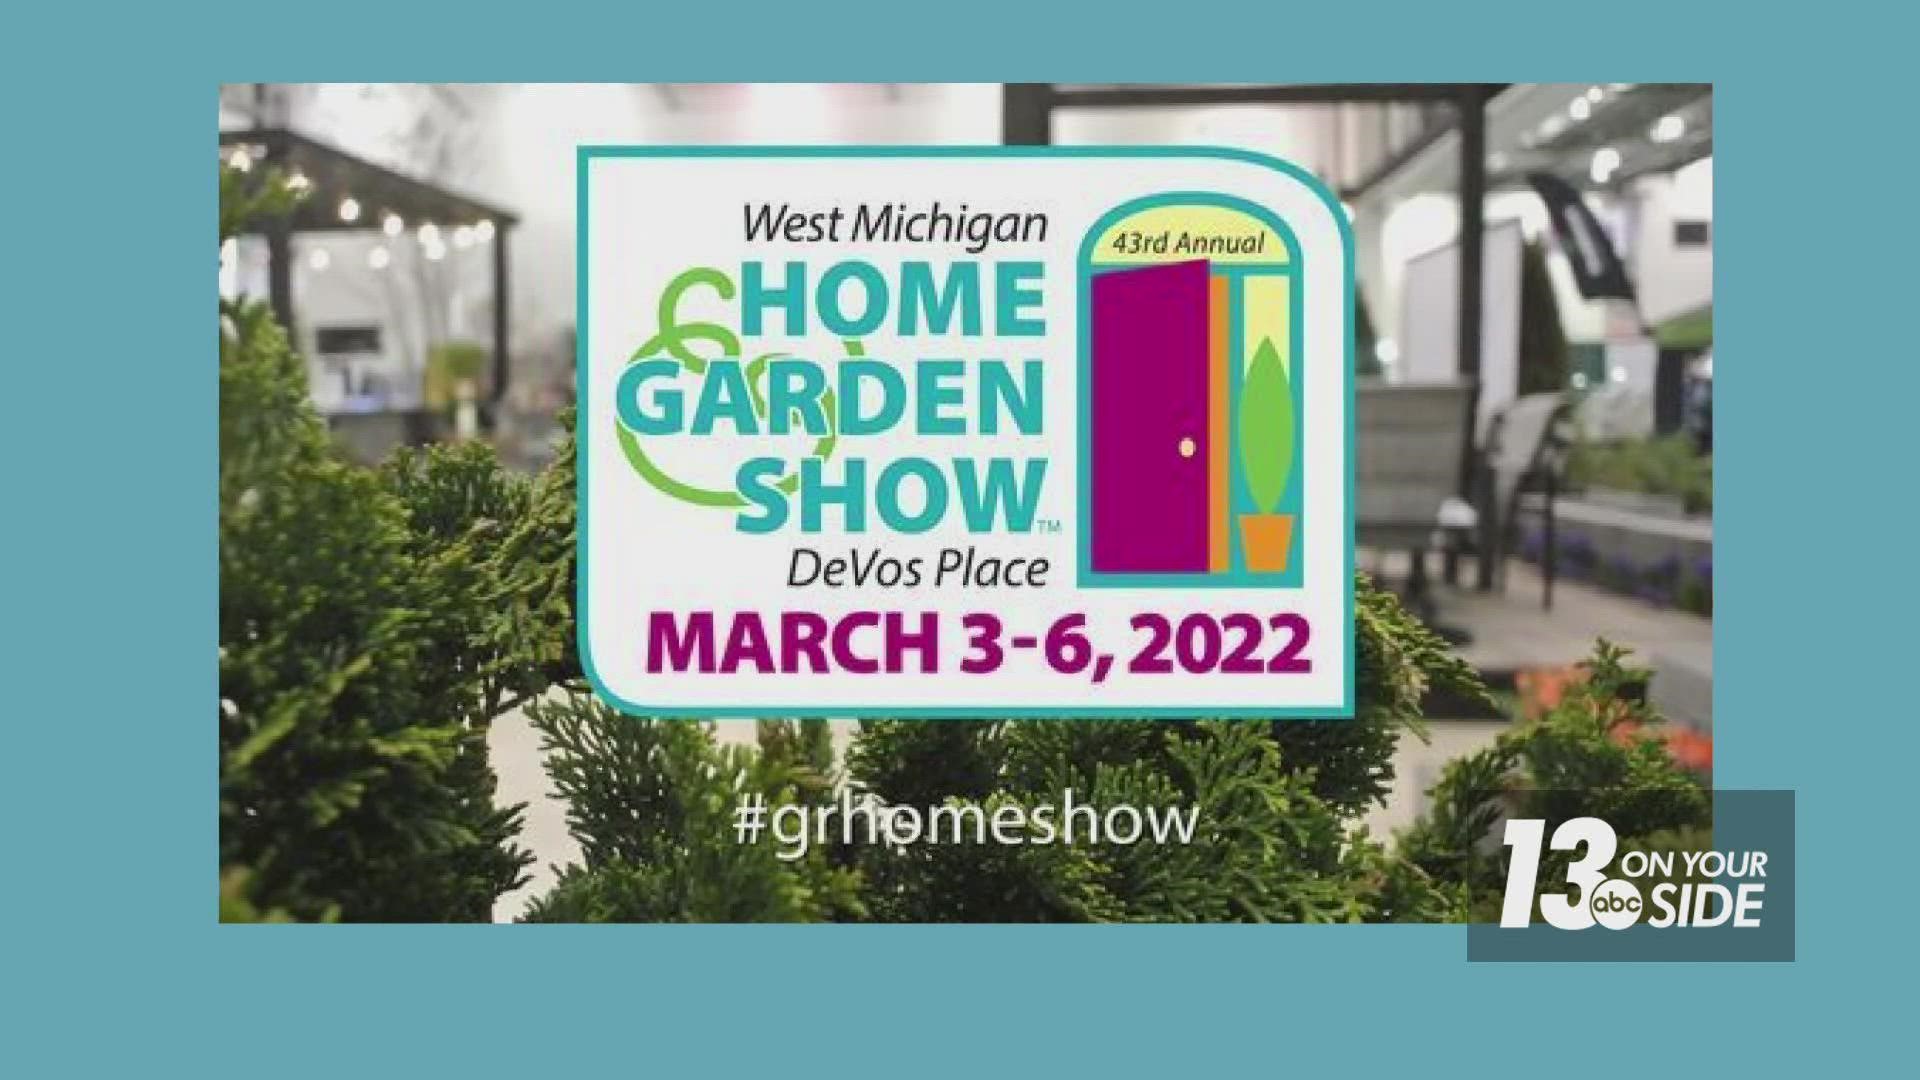 Canning Diva Diane Devereaux will be on stage during the West Michigan Home & Garden Show with all the tips and tricks required to become a next-level canner.